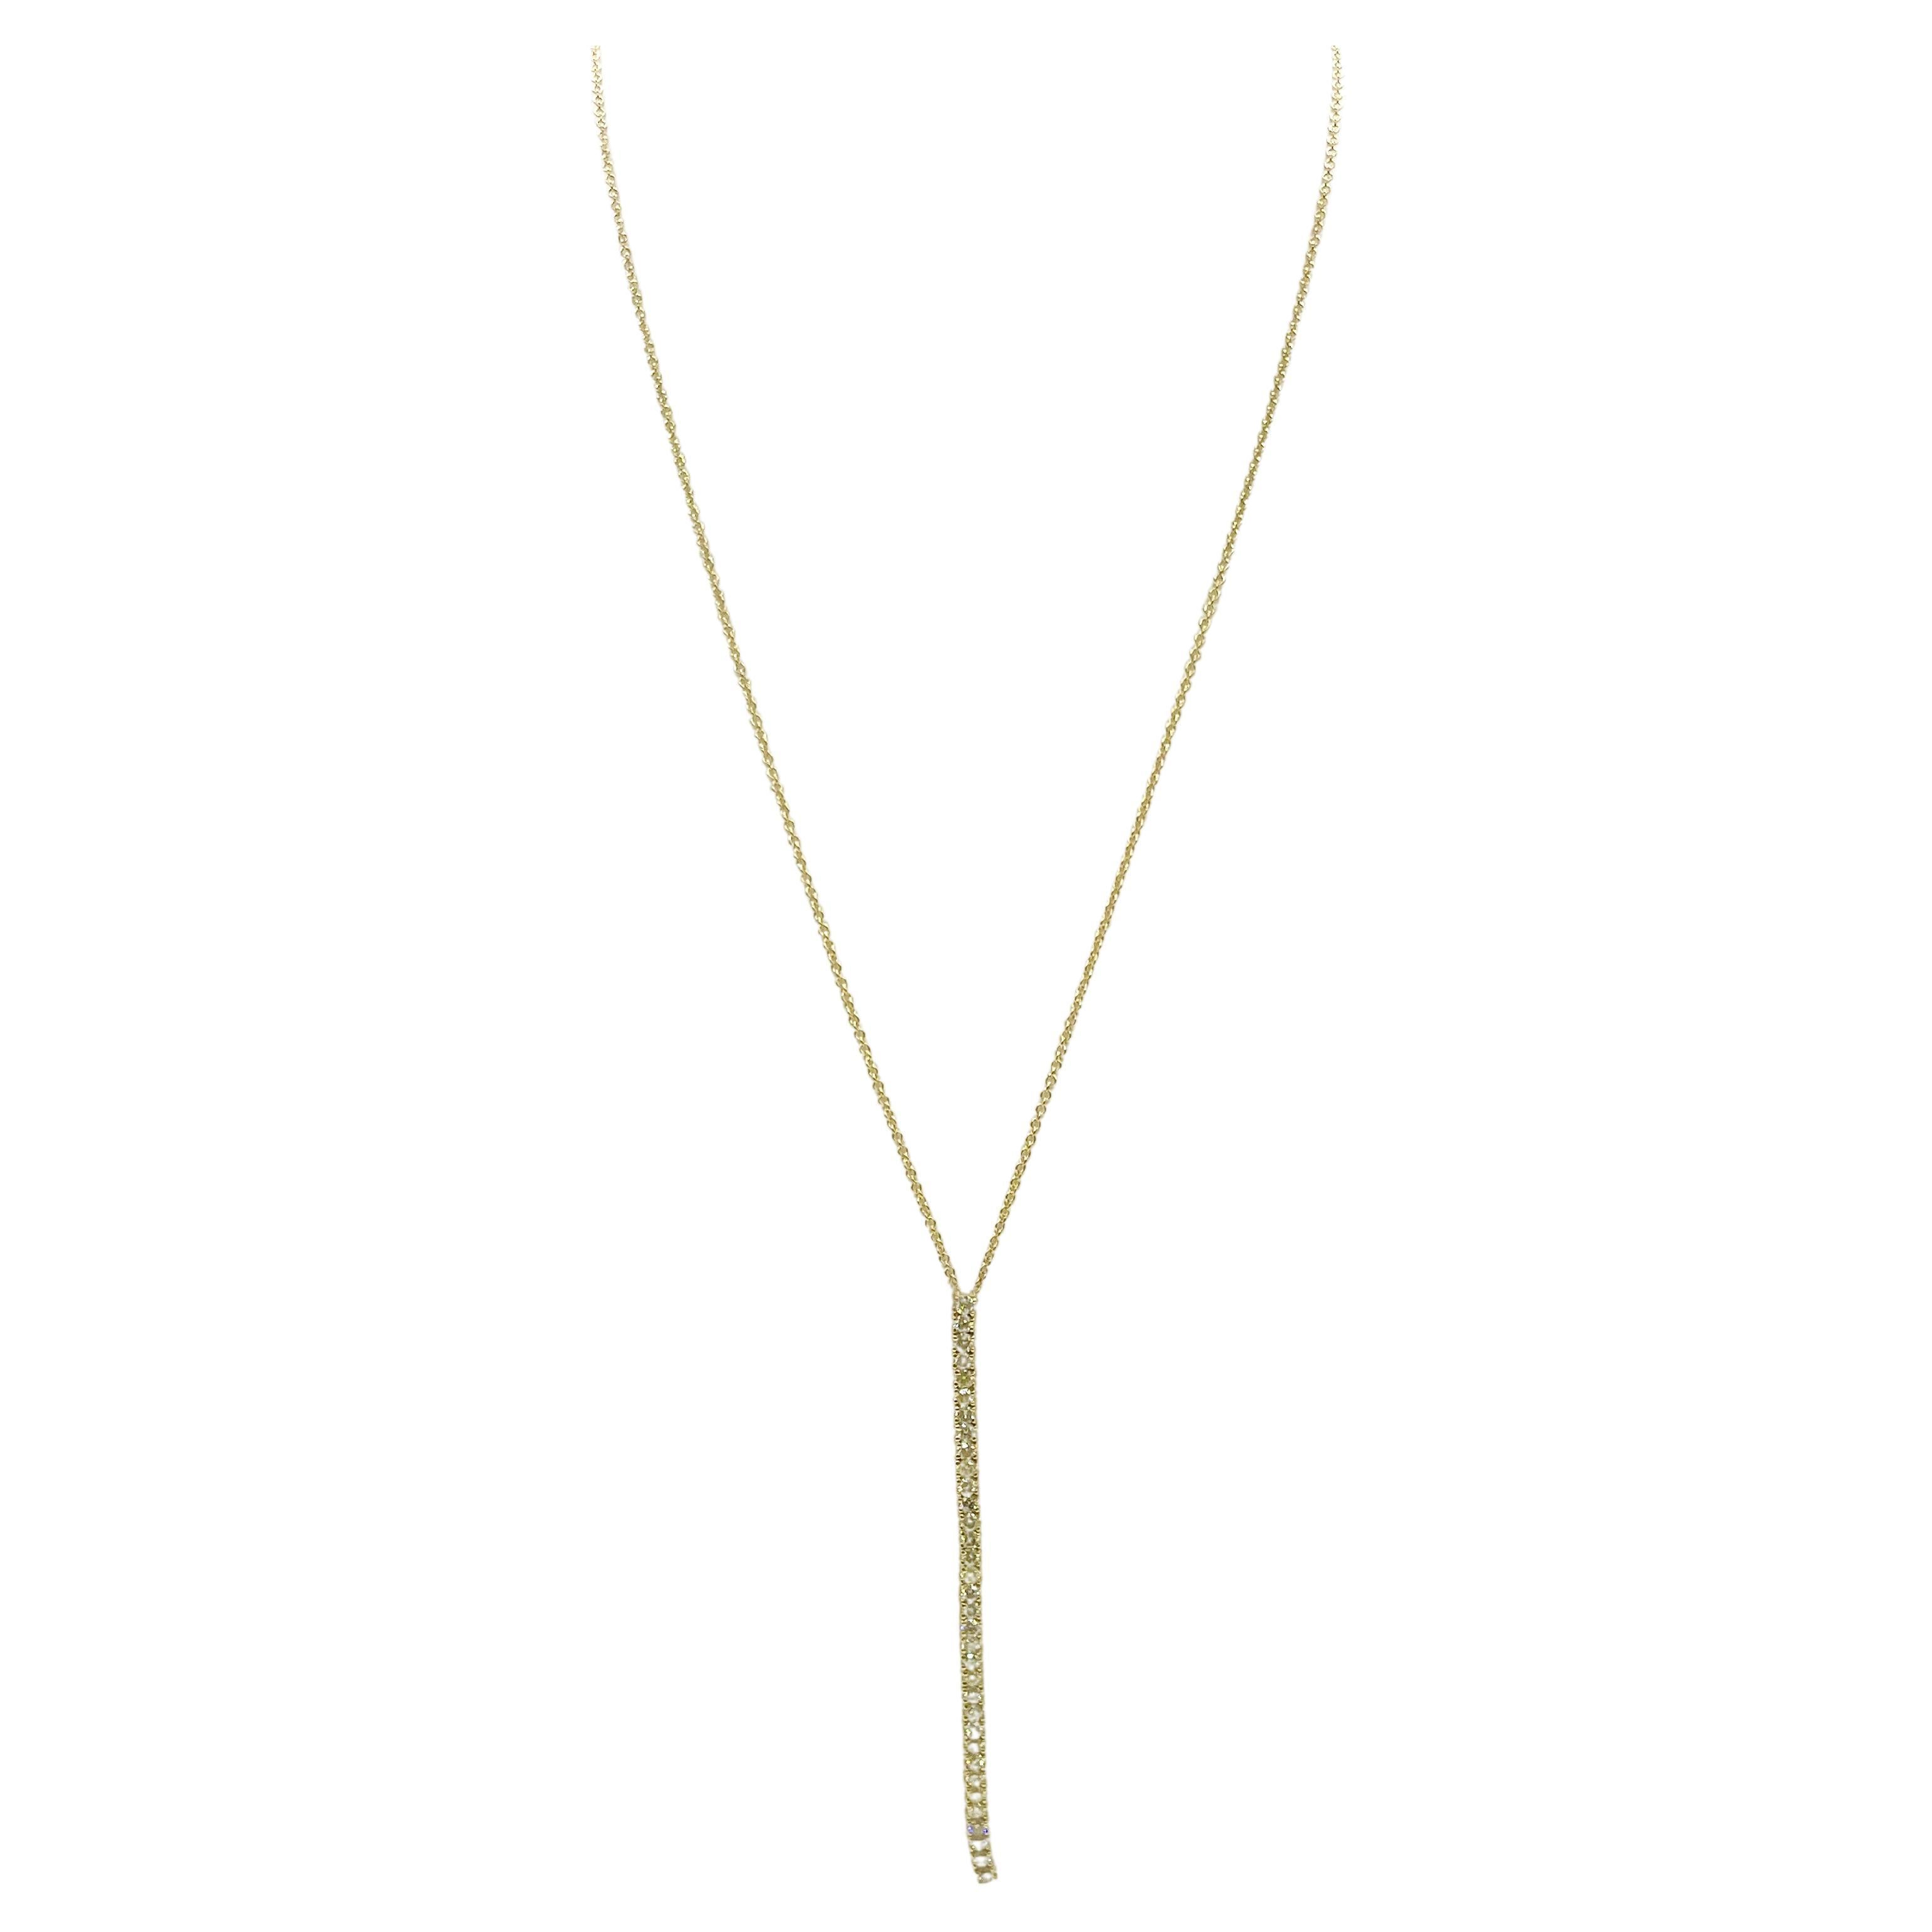 1.41 Carat All Natural Diamond Tennis Drop Necklace in 14K Yellow Gold For Sale